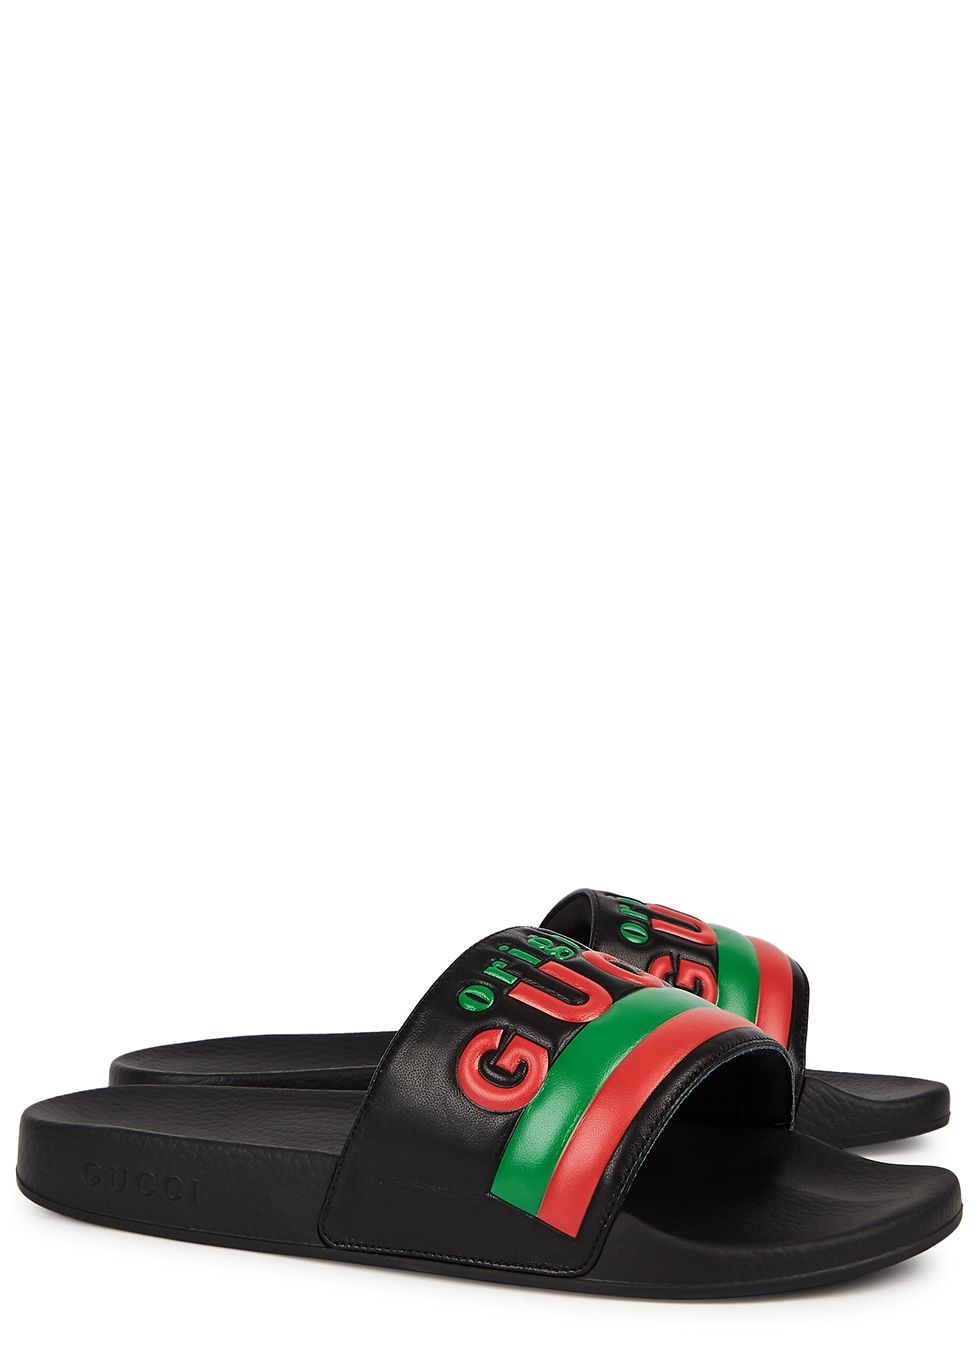 gucci red sliders